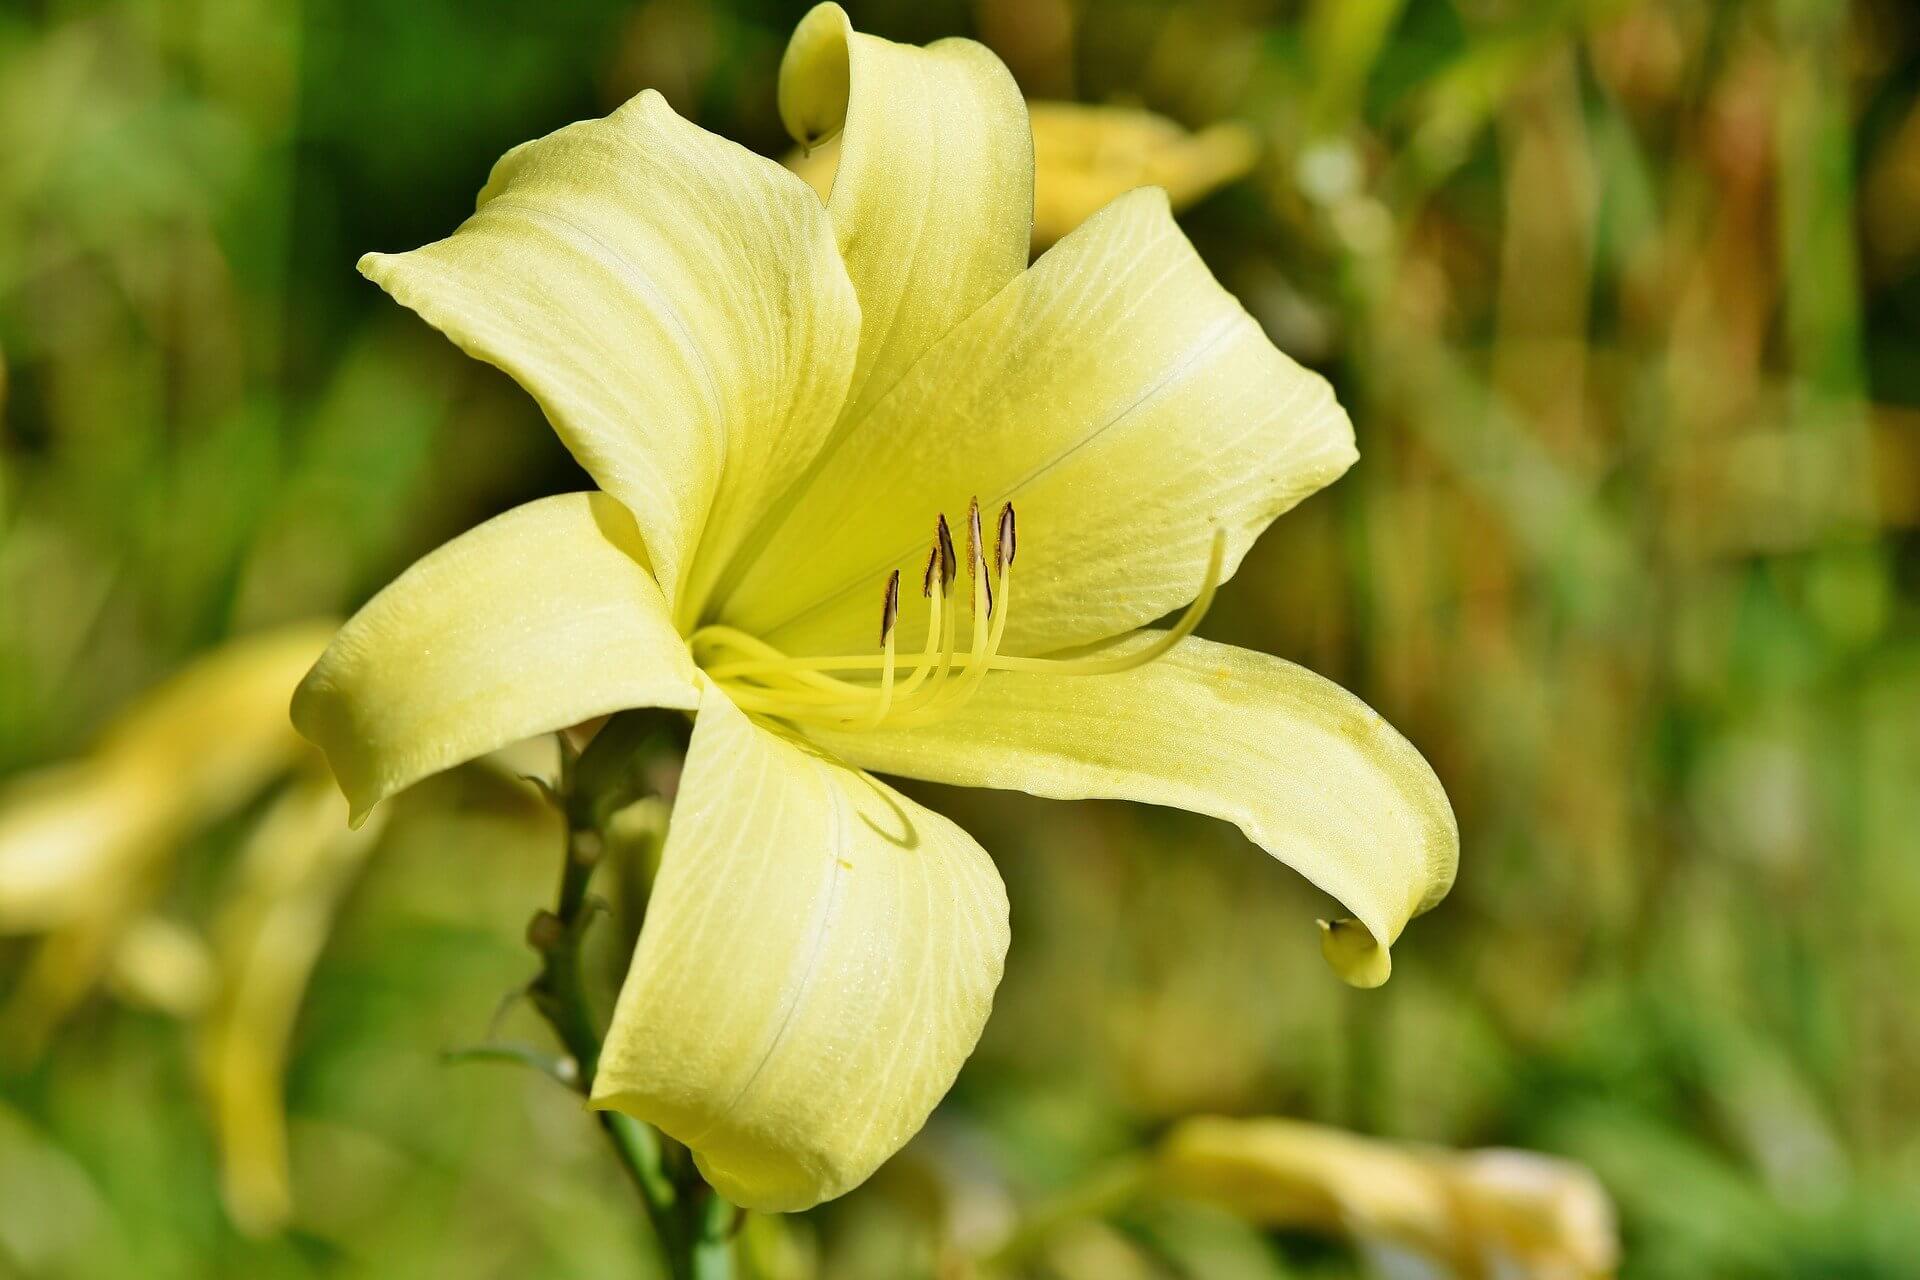 Cultivation of lilies and daylilies